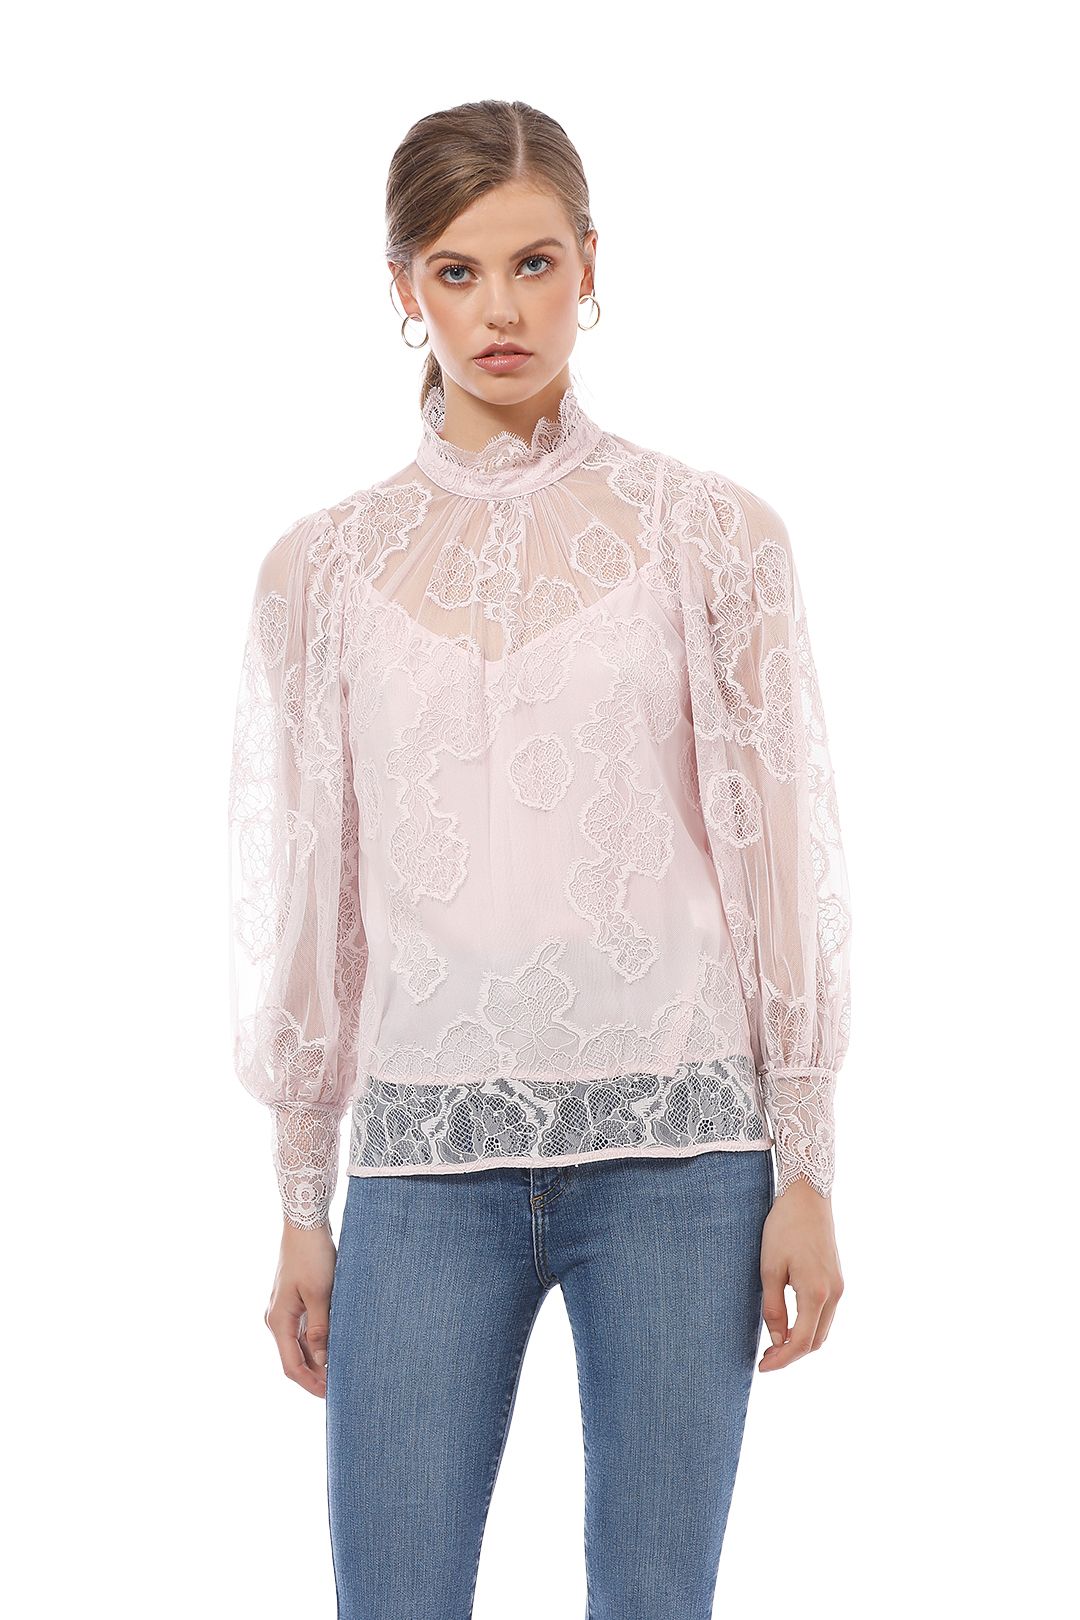 Lace Balloon Sleeve Blouse by Witchery for Hire | GlamCorner